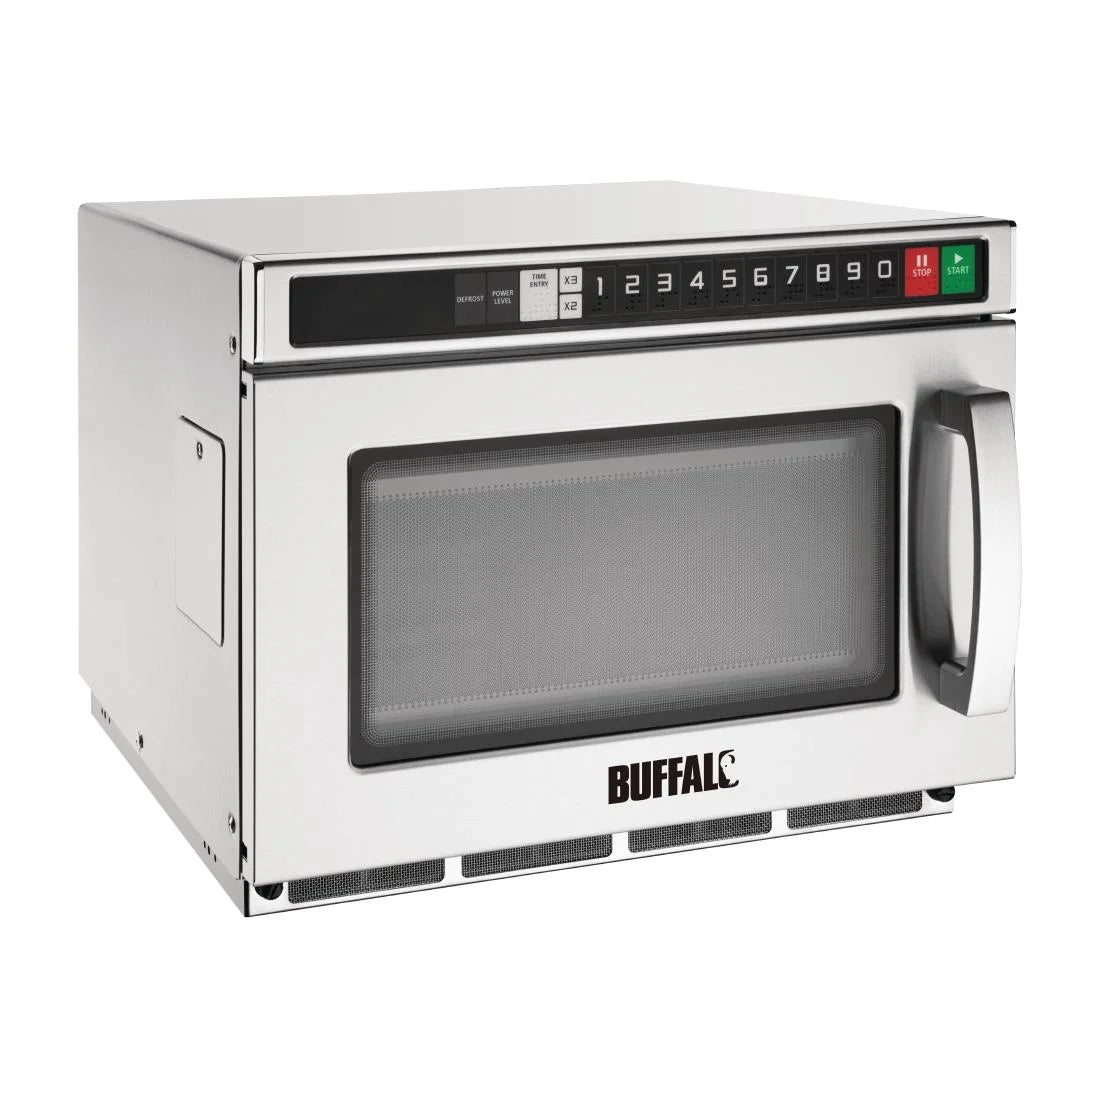 Buffalo Programmable Compact Microwave Oven 17ltr 1800W.Product Ref:00590.Model: FB865. 🚚 1-3 Days Delivery